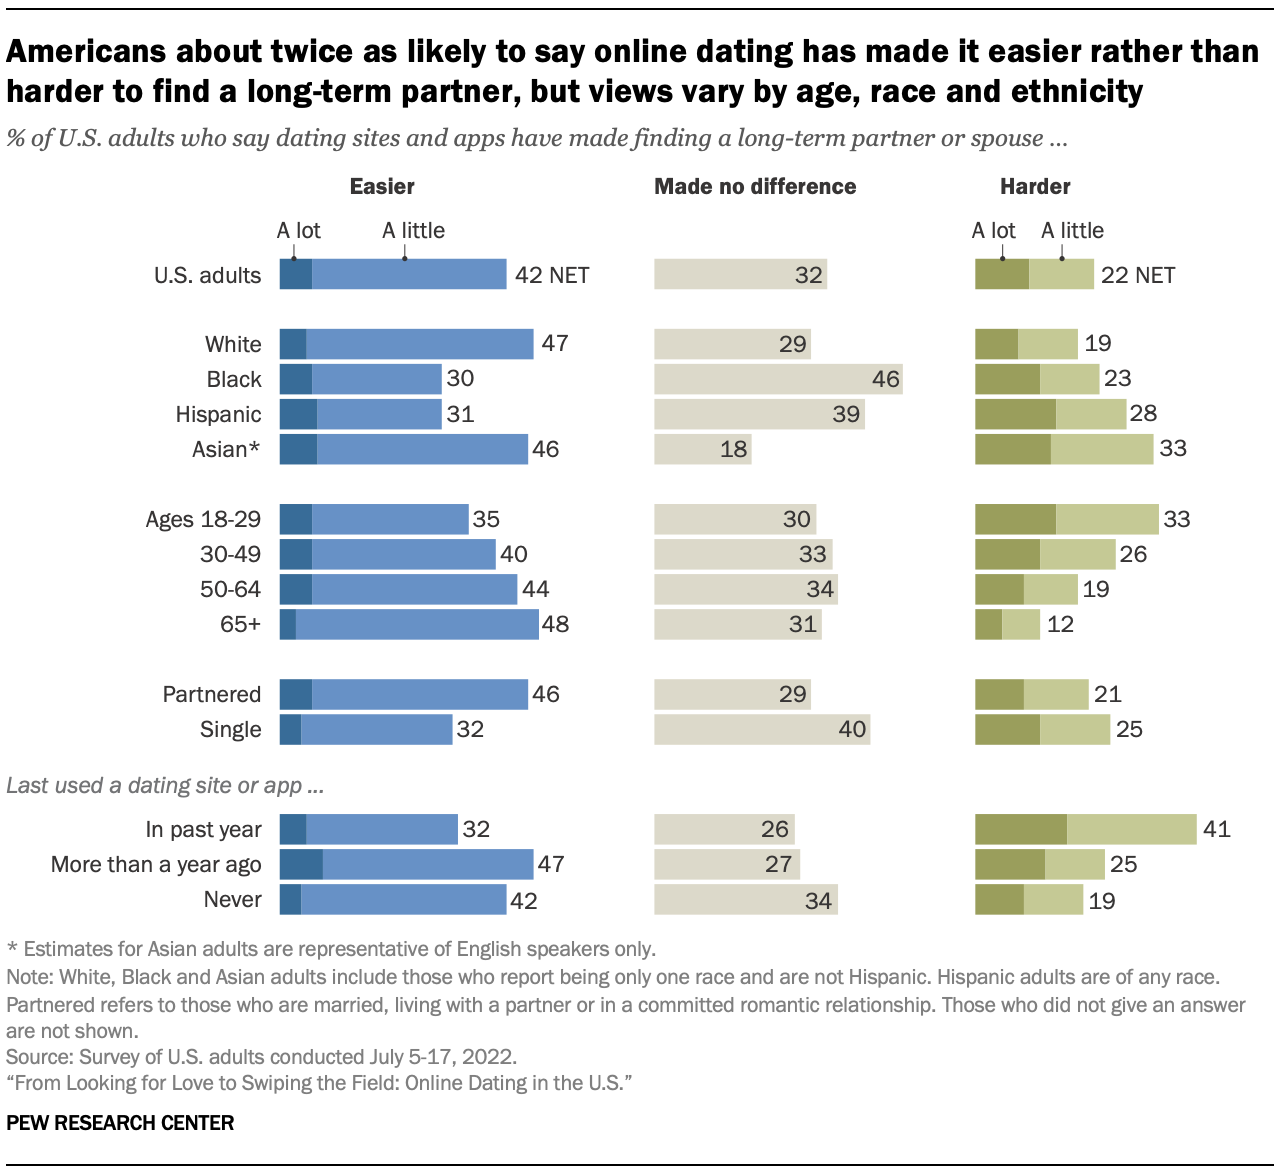 Americans about twice as likely to say online dating has made it easier rather than harder to find a long-term partner, but views vary by age, race and ethnicity 